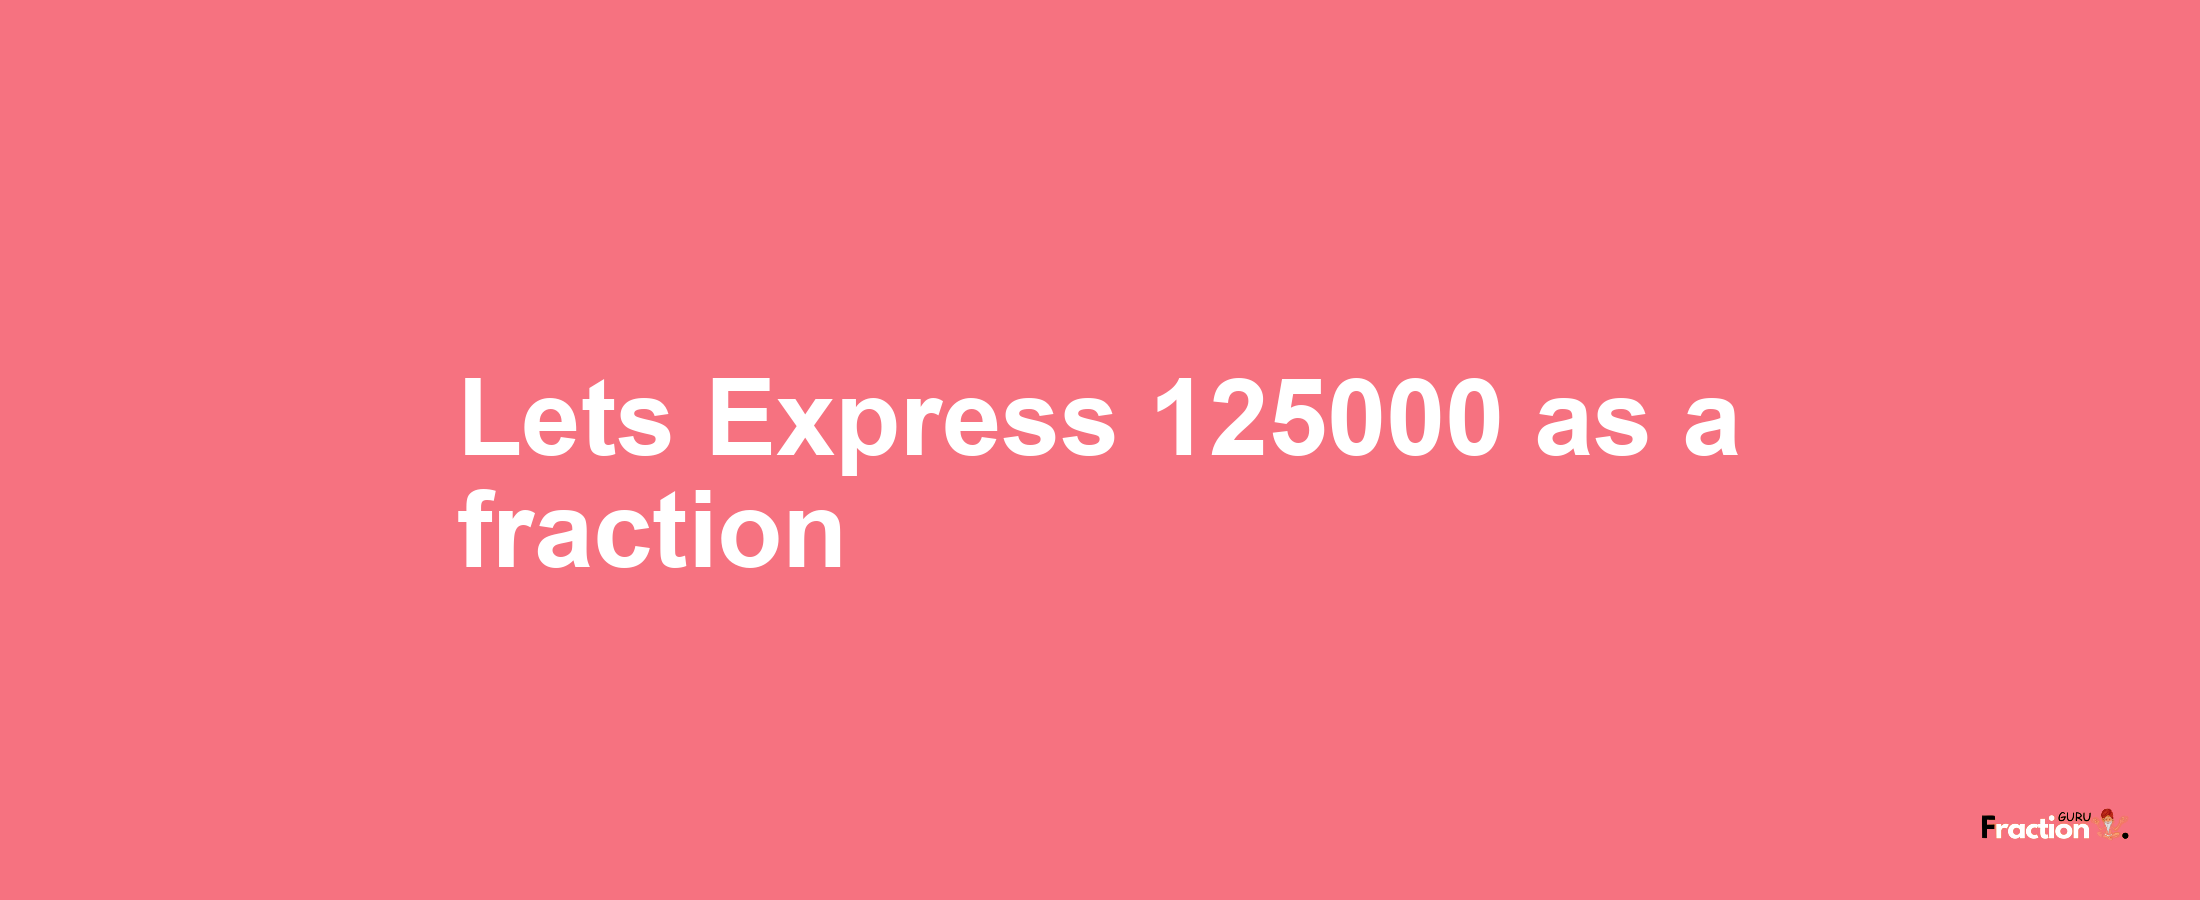 Lets Express 125000 as afraction